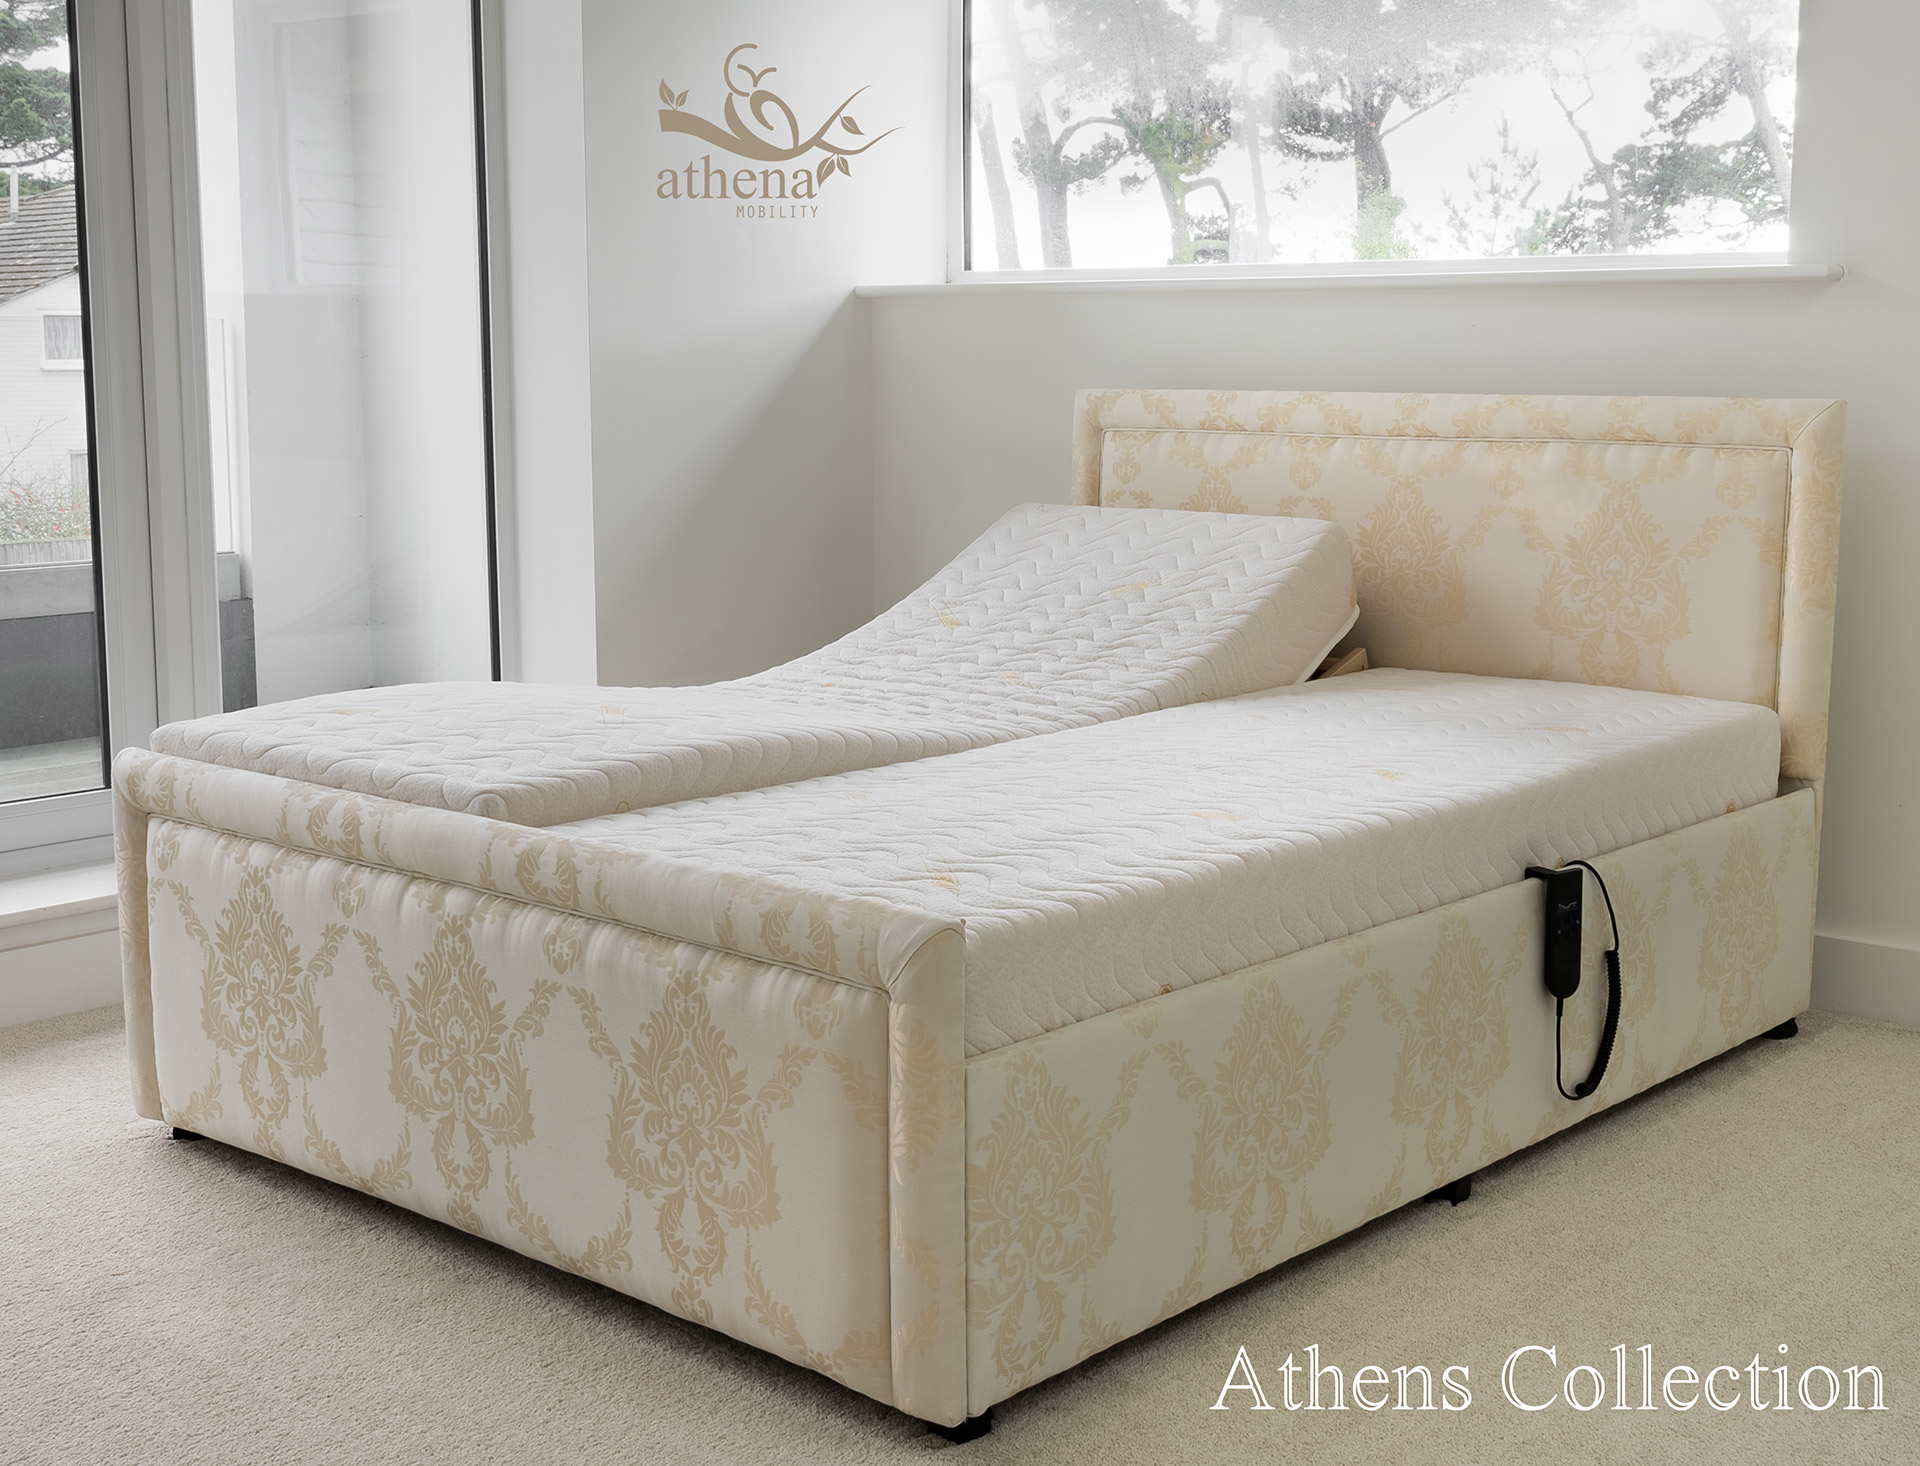 Athena Mobility | Athens Bed Collection